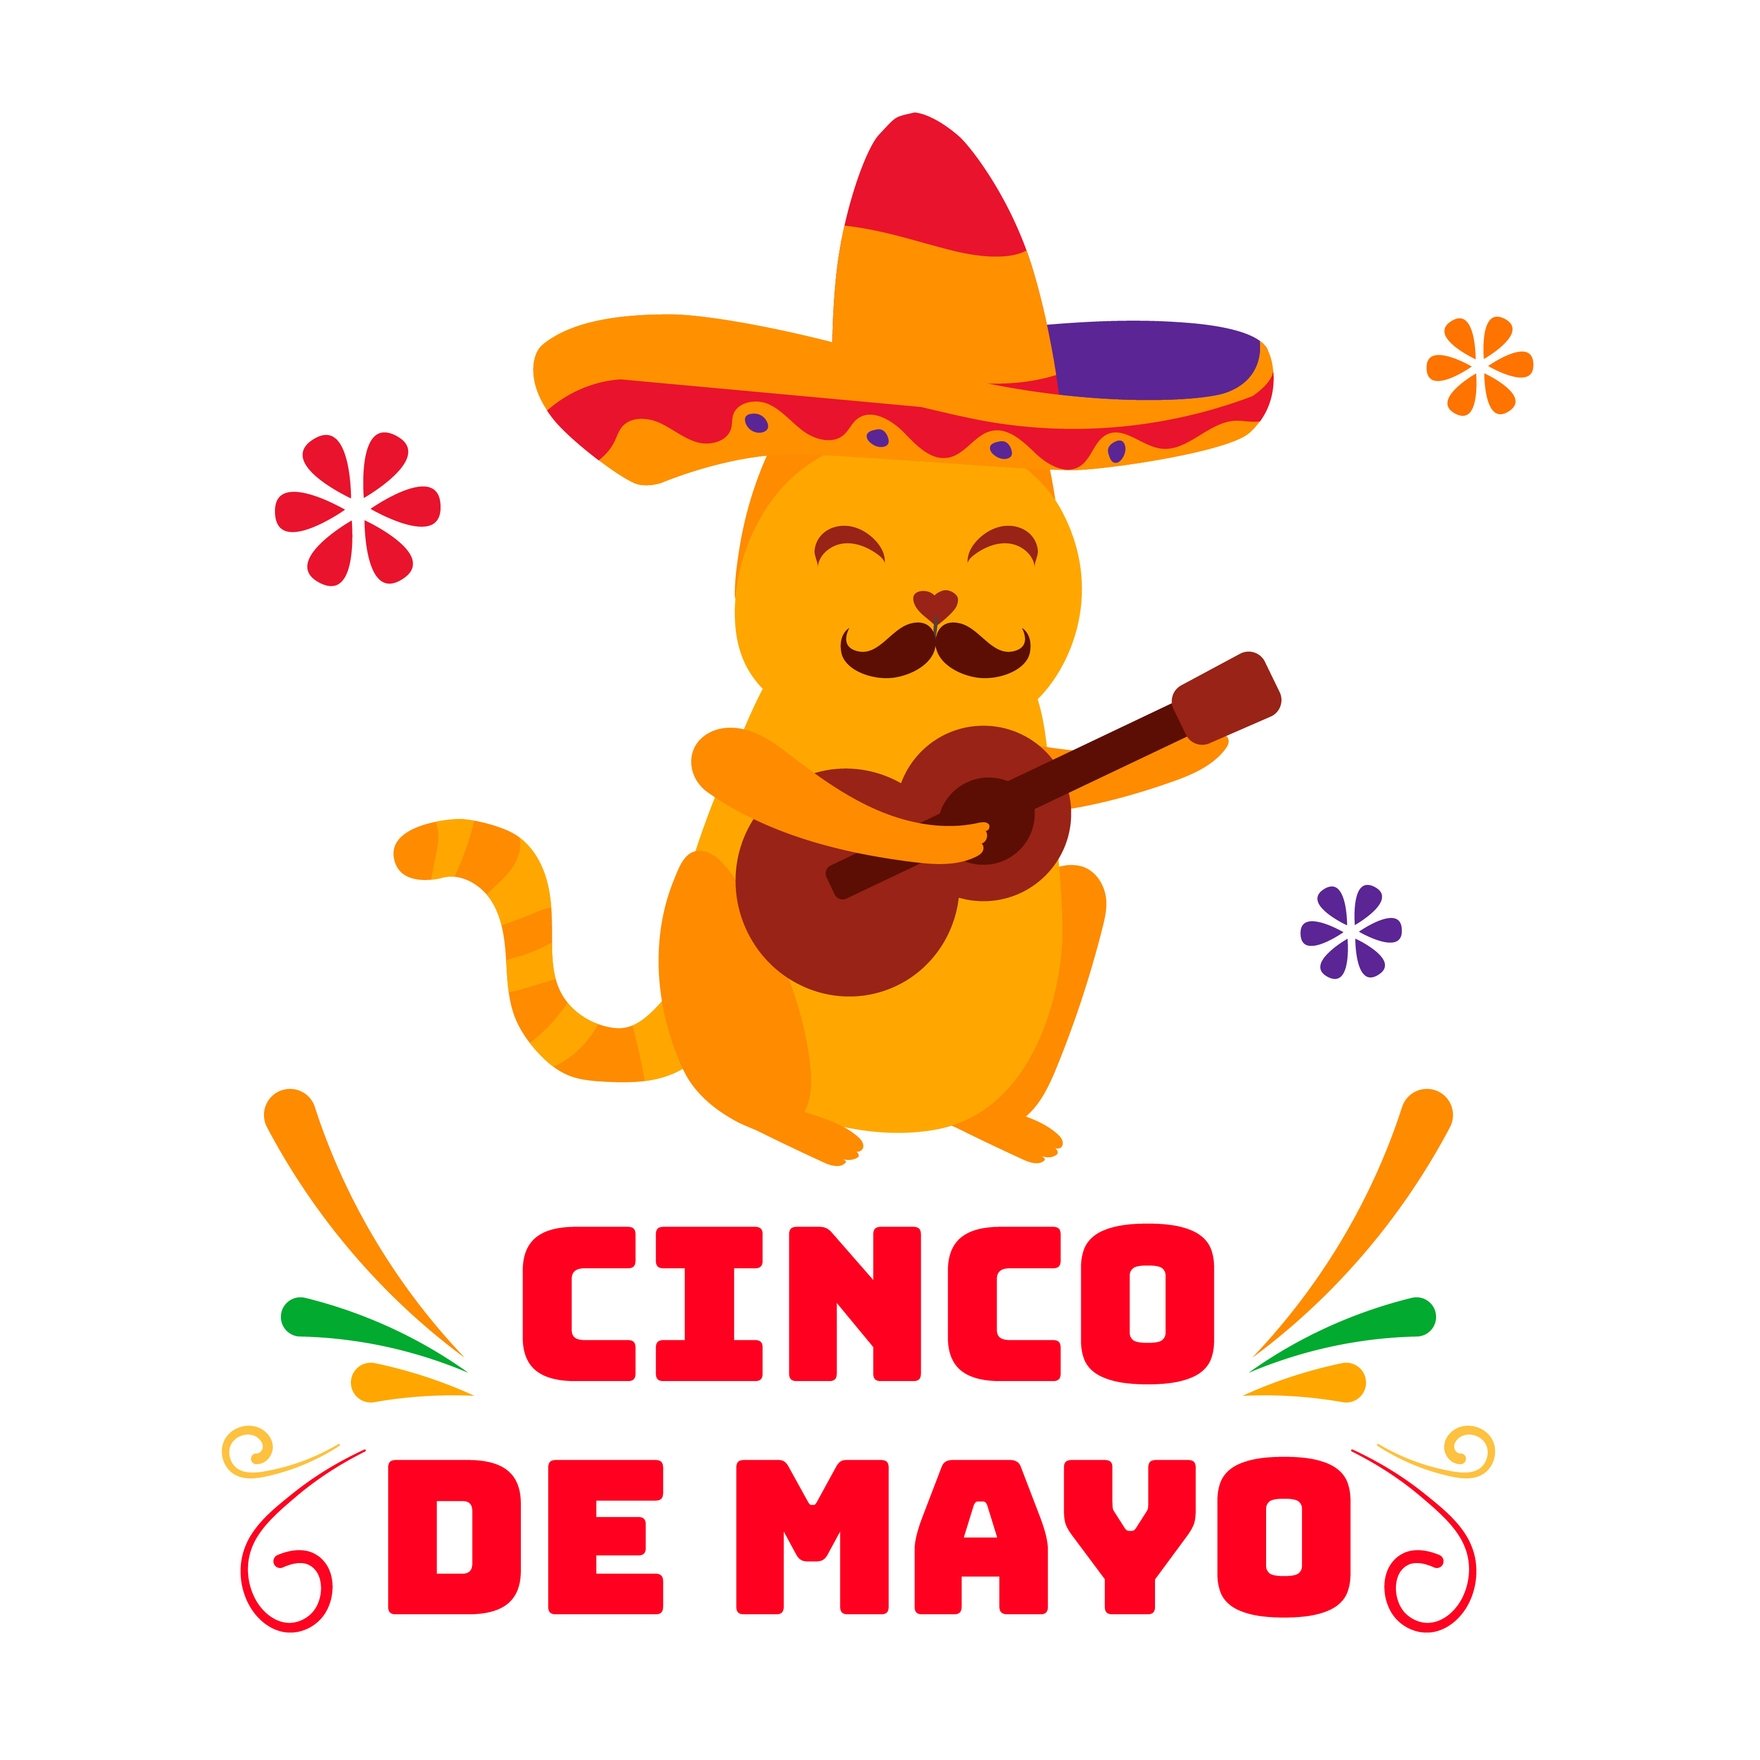 Cinco De Mayo Cat Gif in Illustrator, EPS, SVG, JPG, GIF, PNG, After Effects